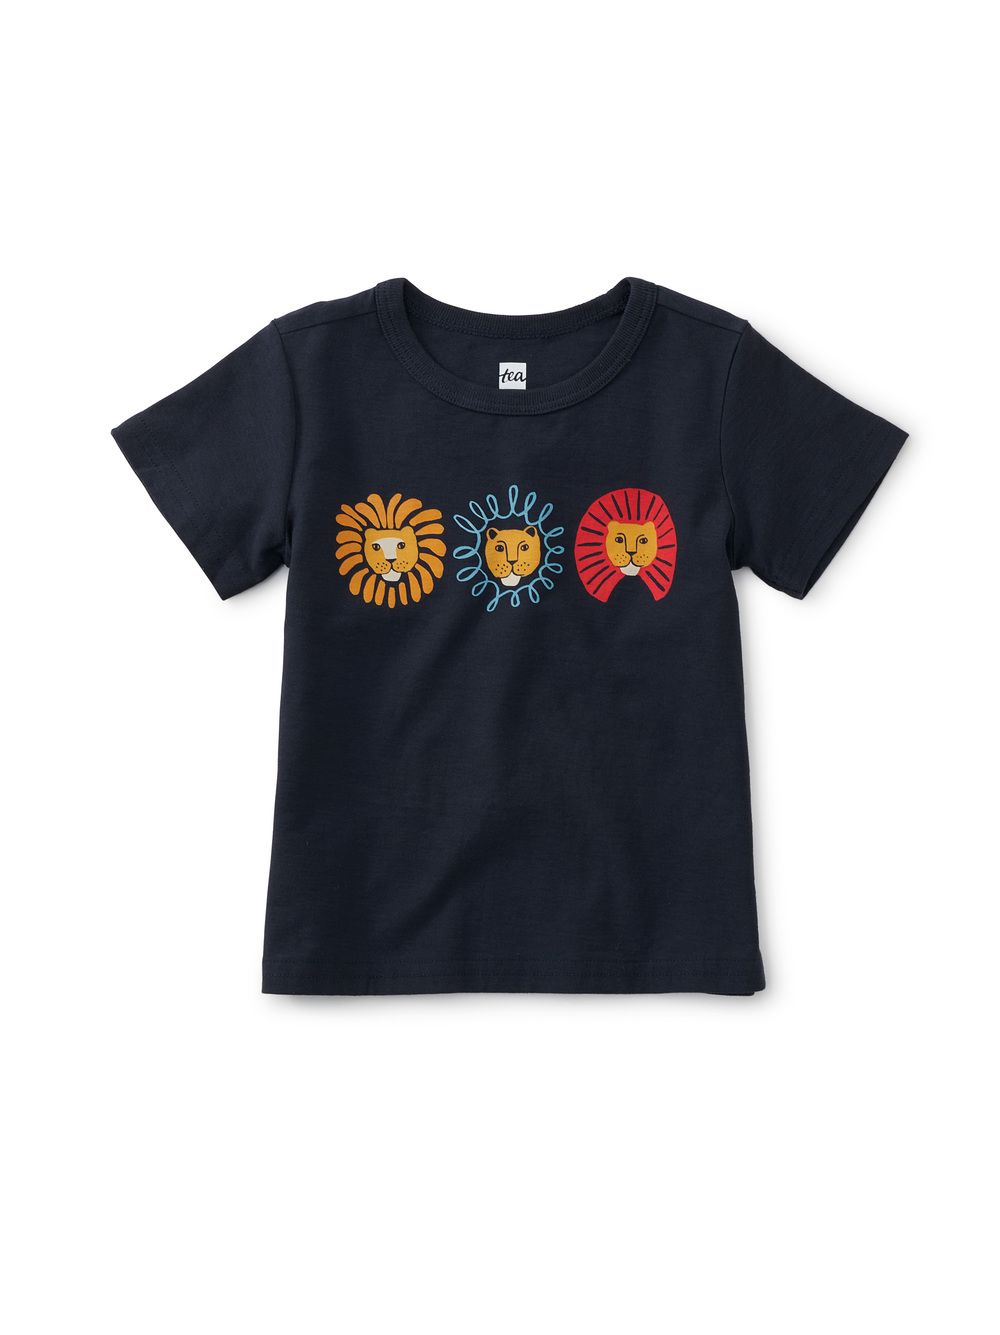 Lion Masks Baby Graphic Tee